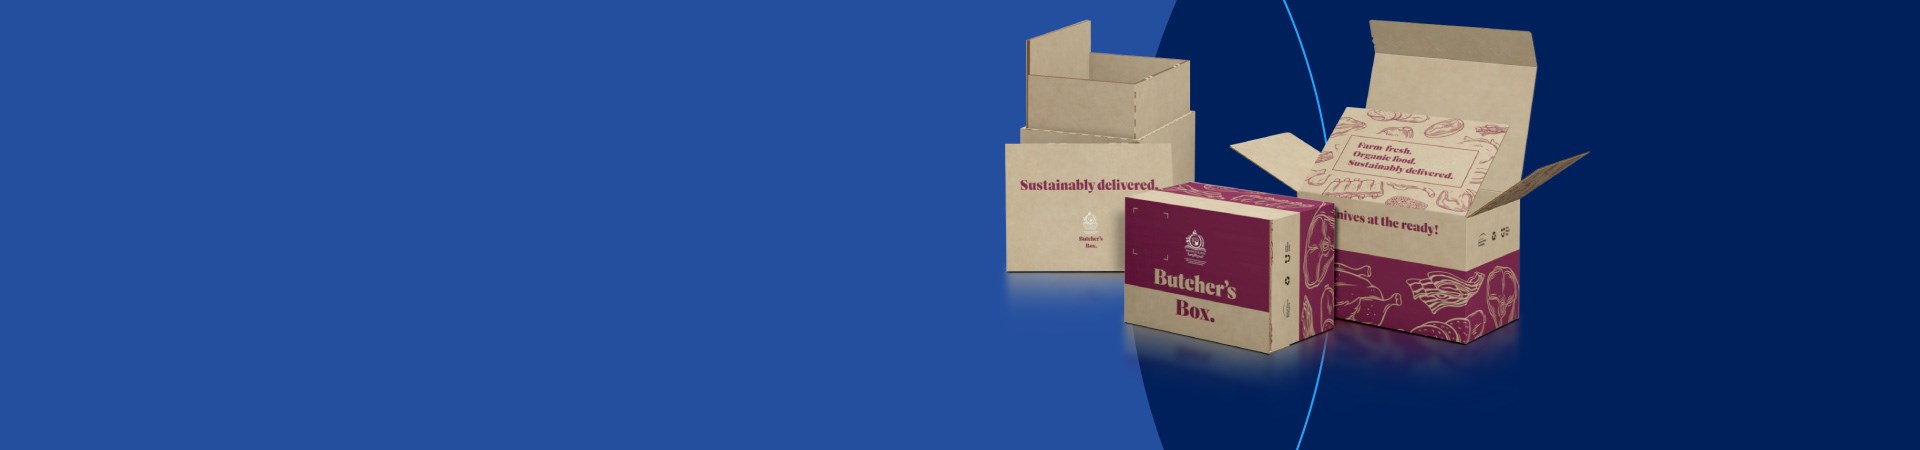 Insulated deliver packaging cardboard box